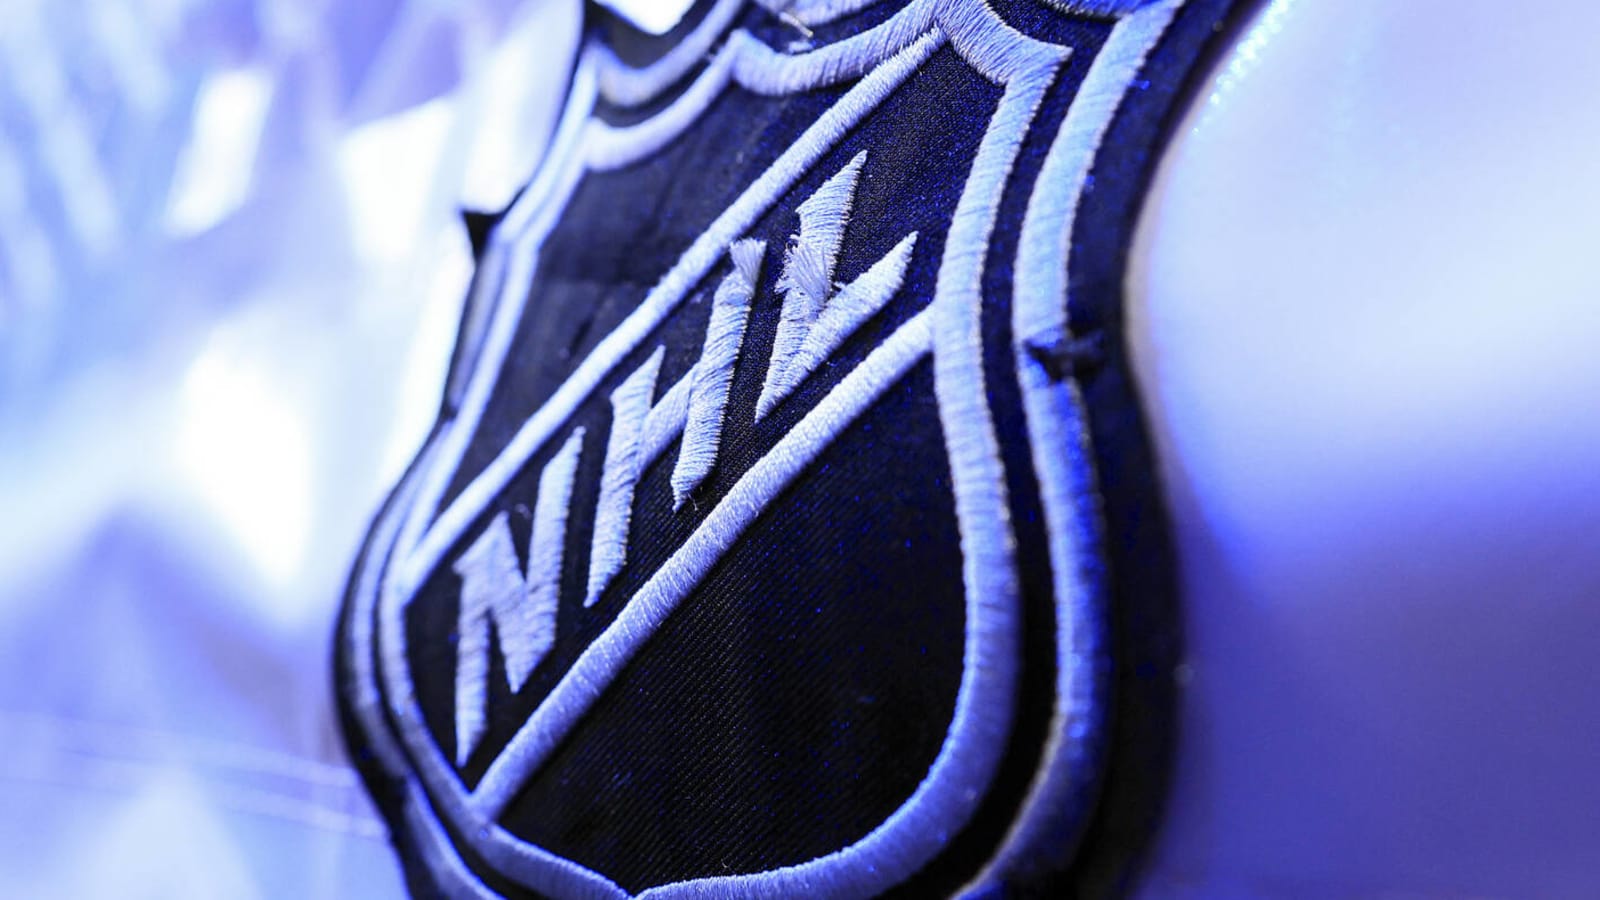 NHL sets Stanley Cup Final schedule